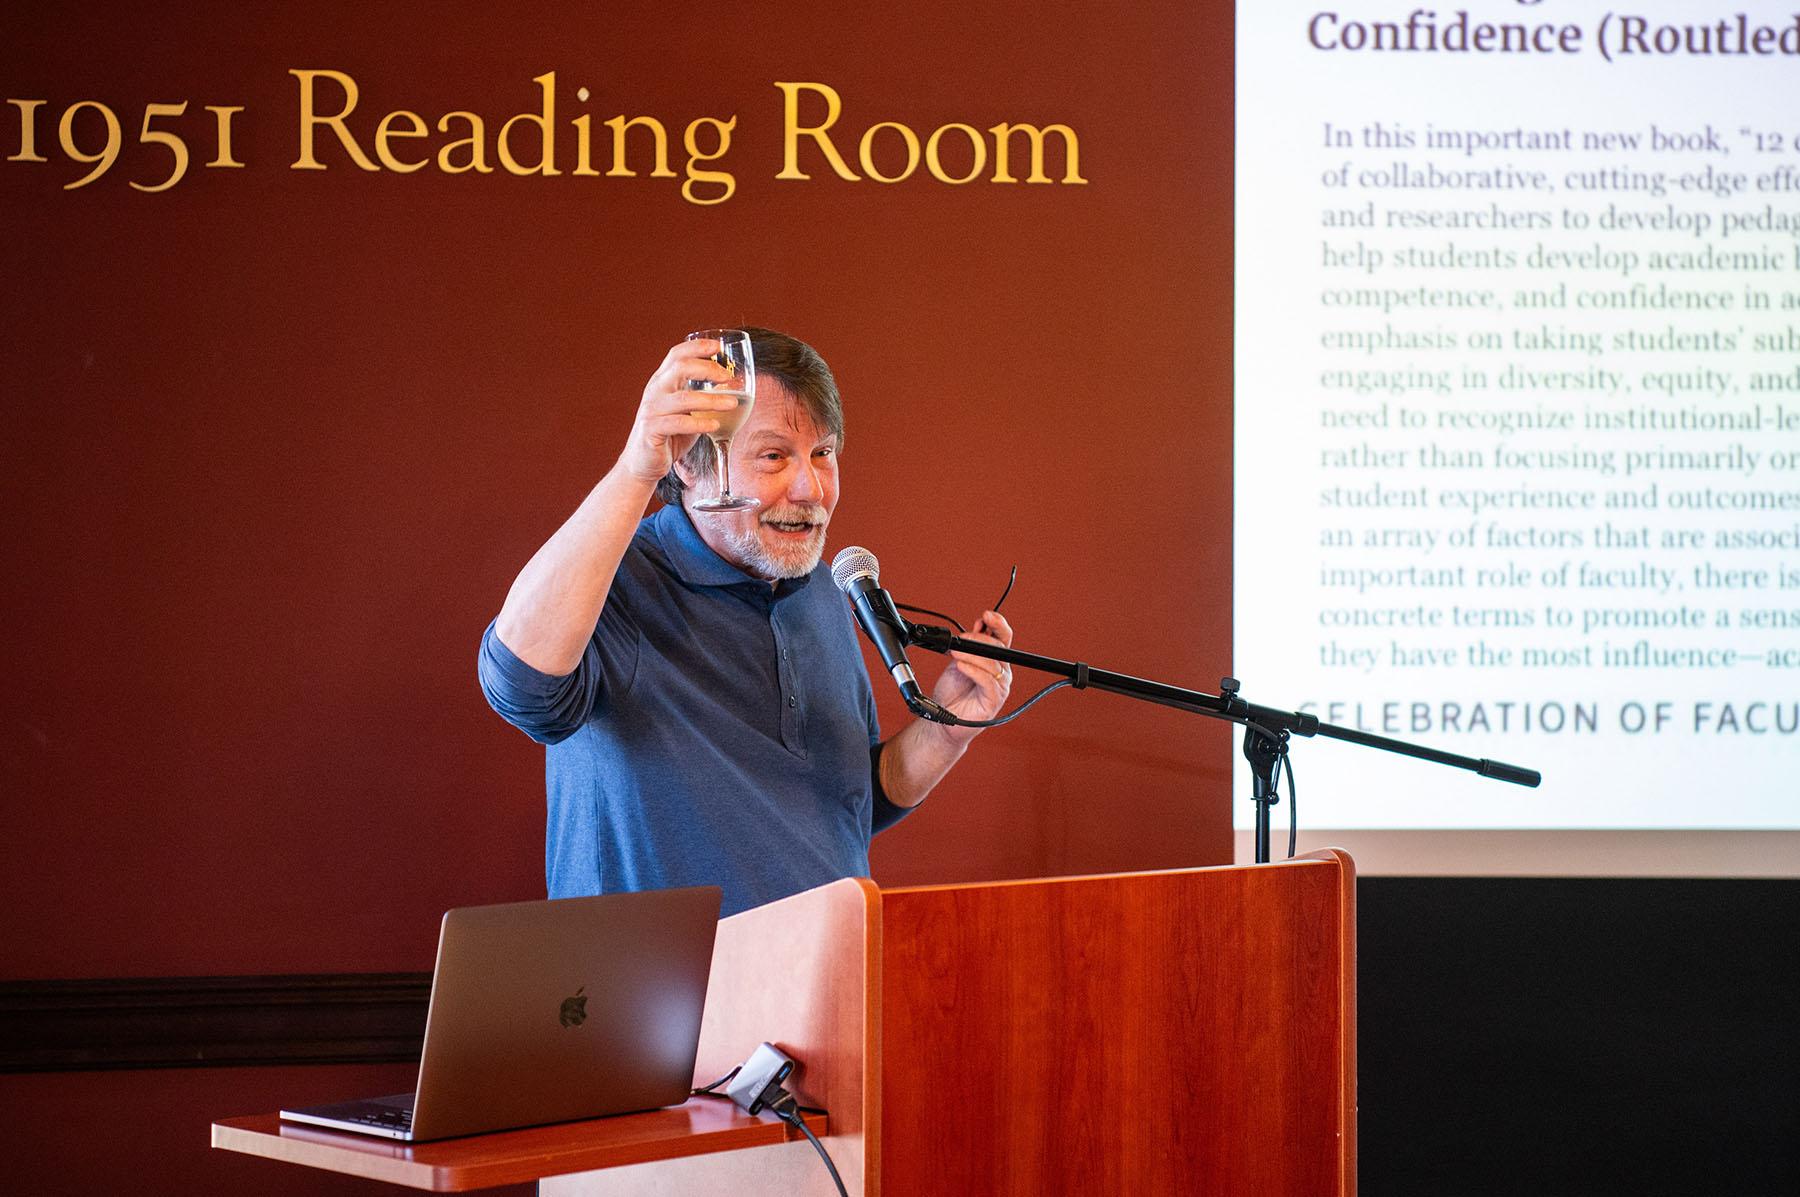 Dean of Faculty William Hoynes standing at a podium using a projector screen for his presentation, his hand in the air holding a glass.